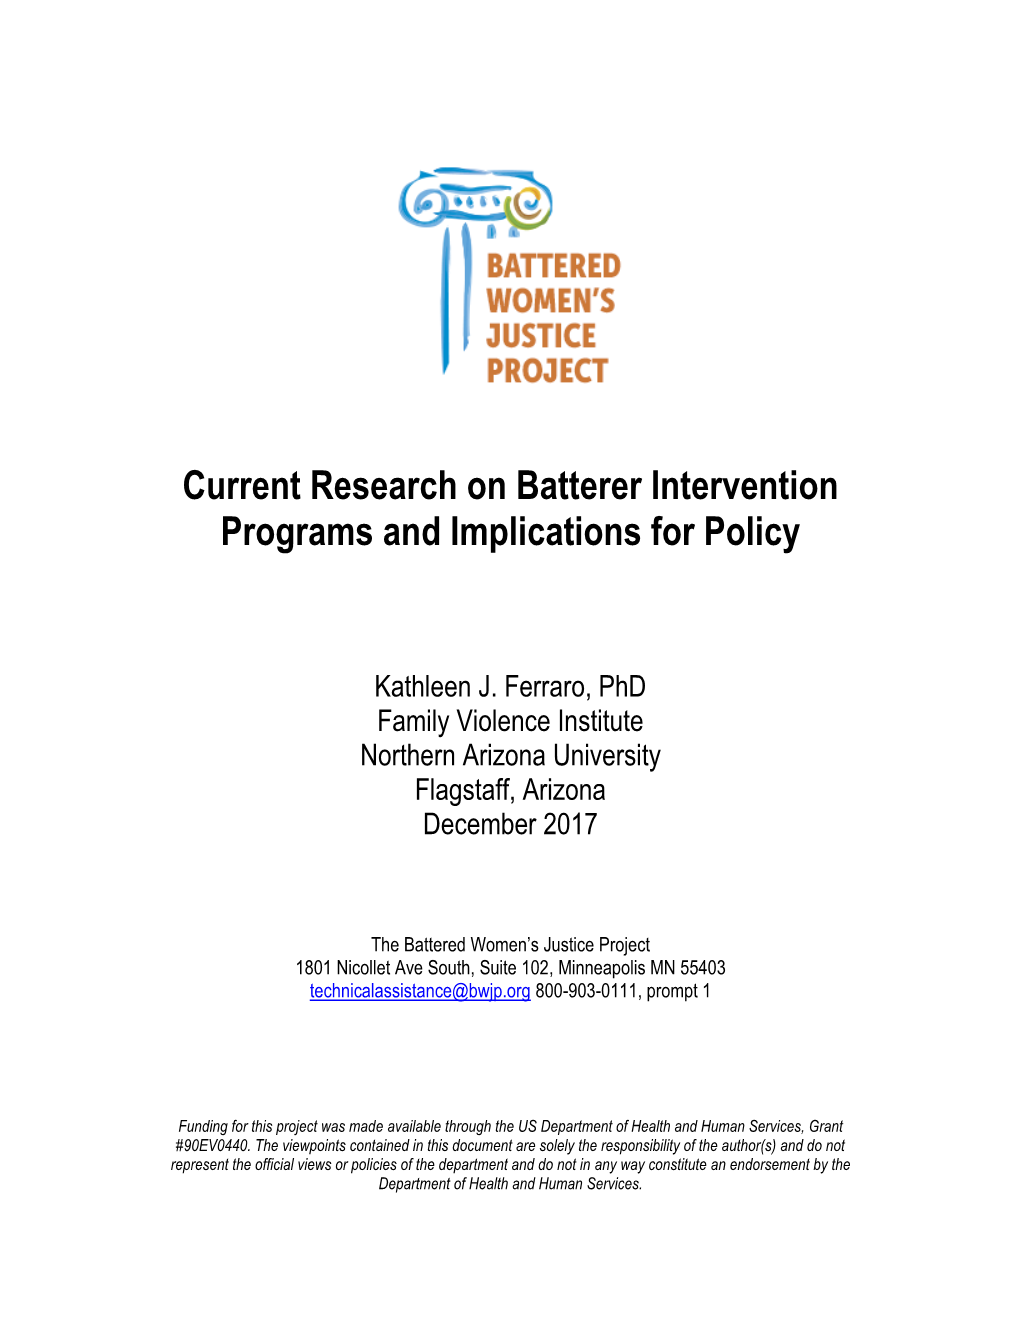 Current Research on Batterer Intervention Programs and Implications for Policy